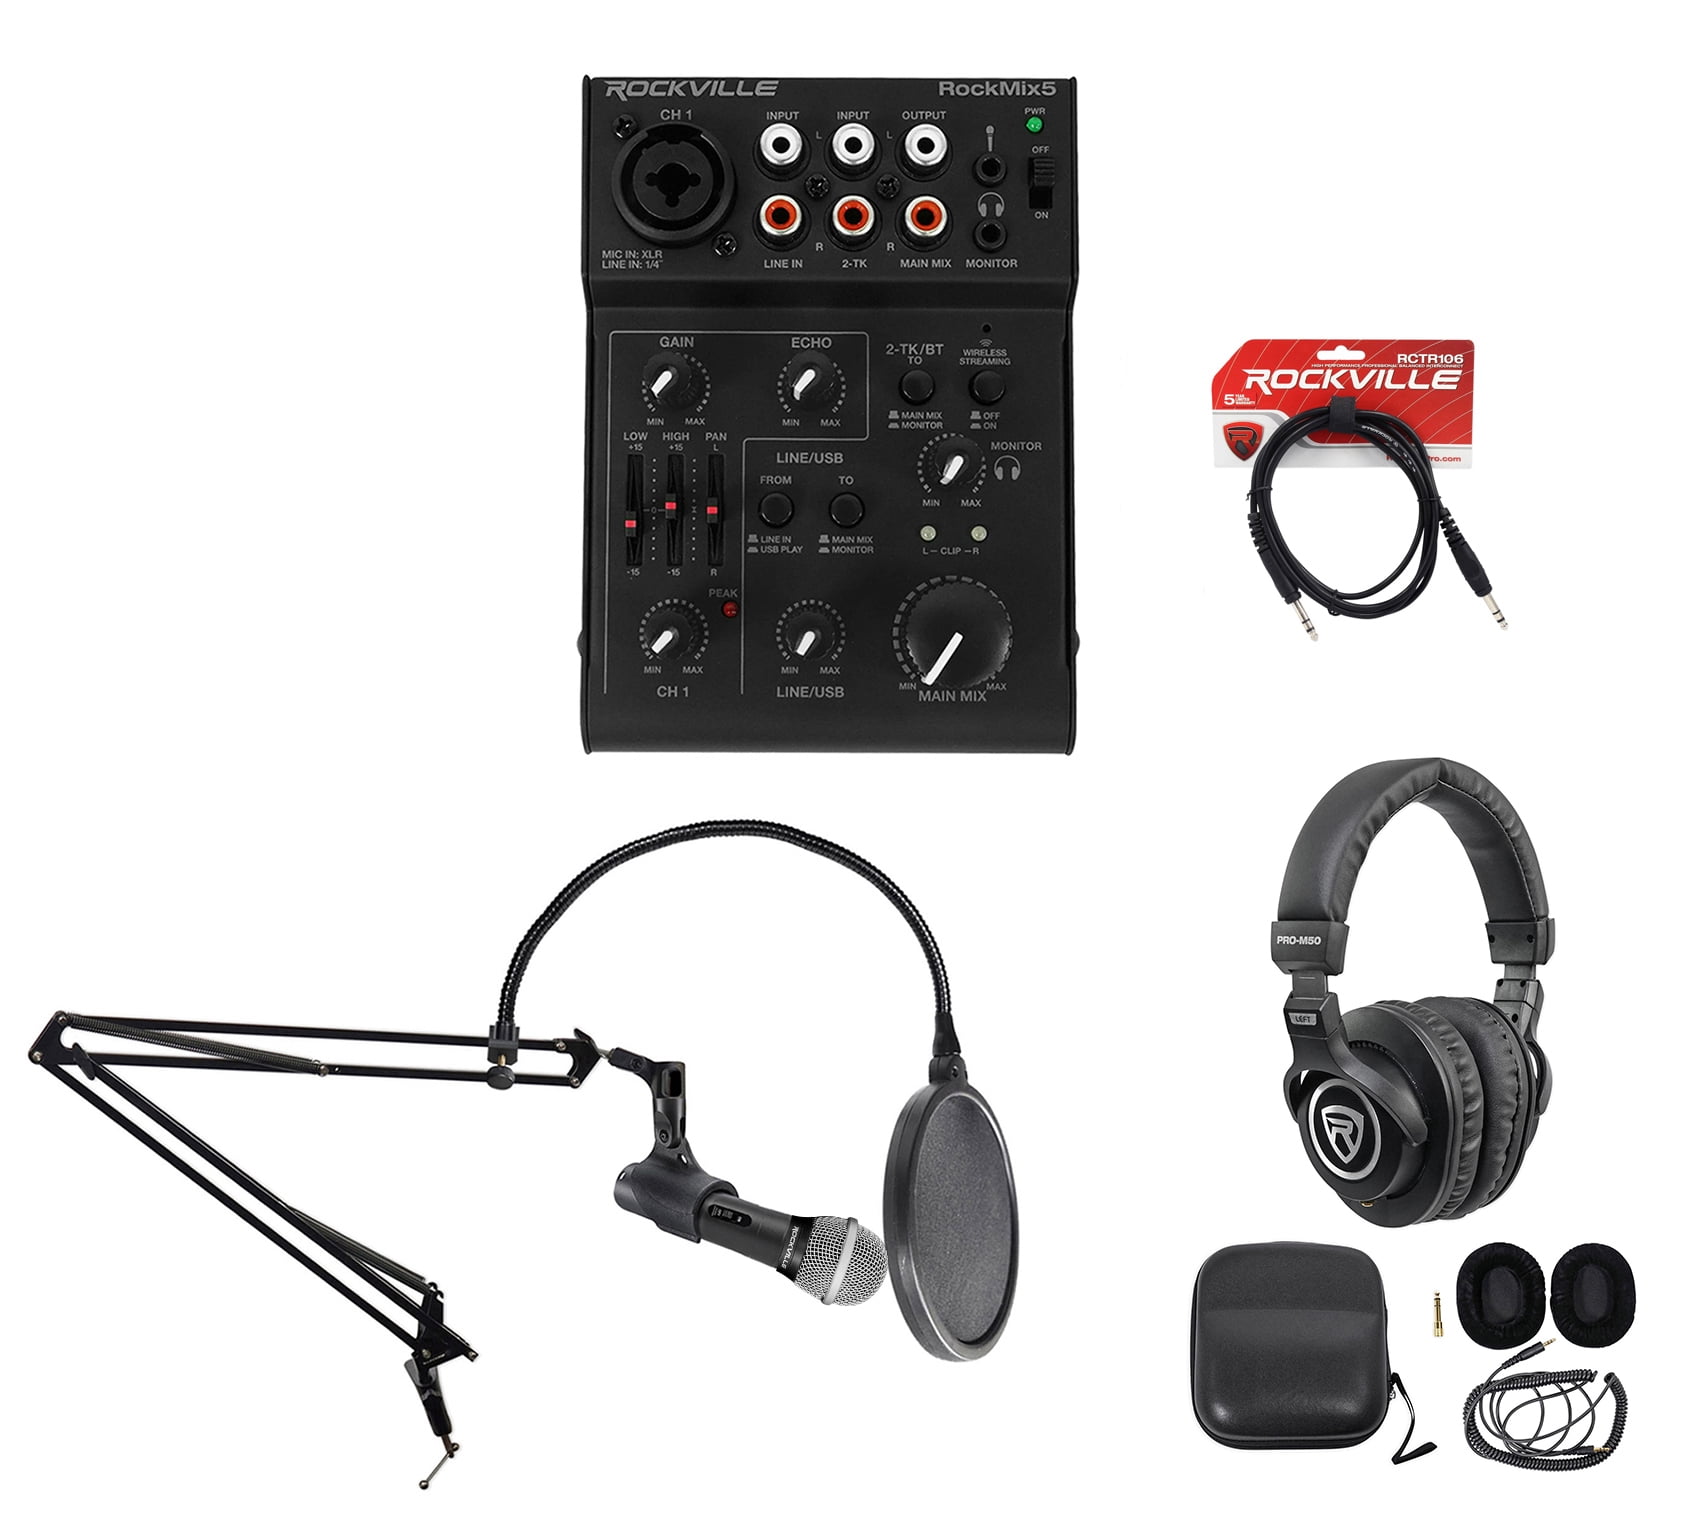 Rockville PC Podcasting Podcast Streaming Bundle w/ Microphone+Stand+Headphones 